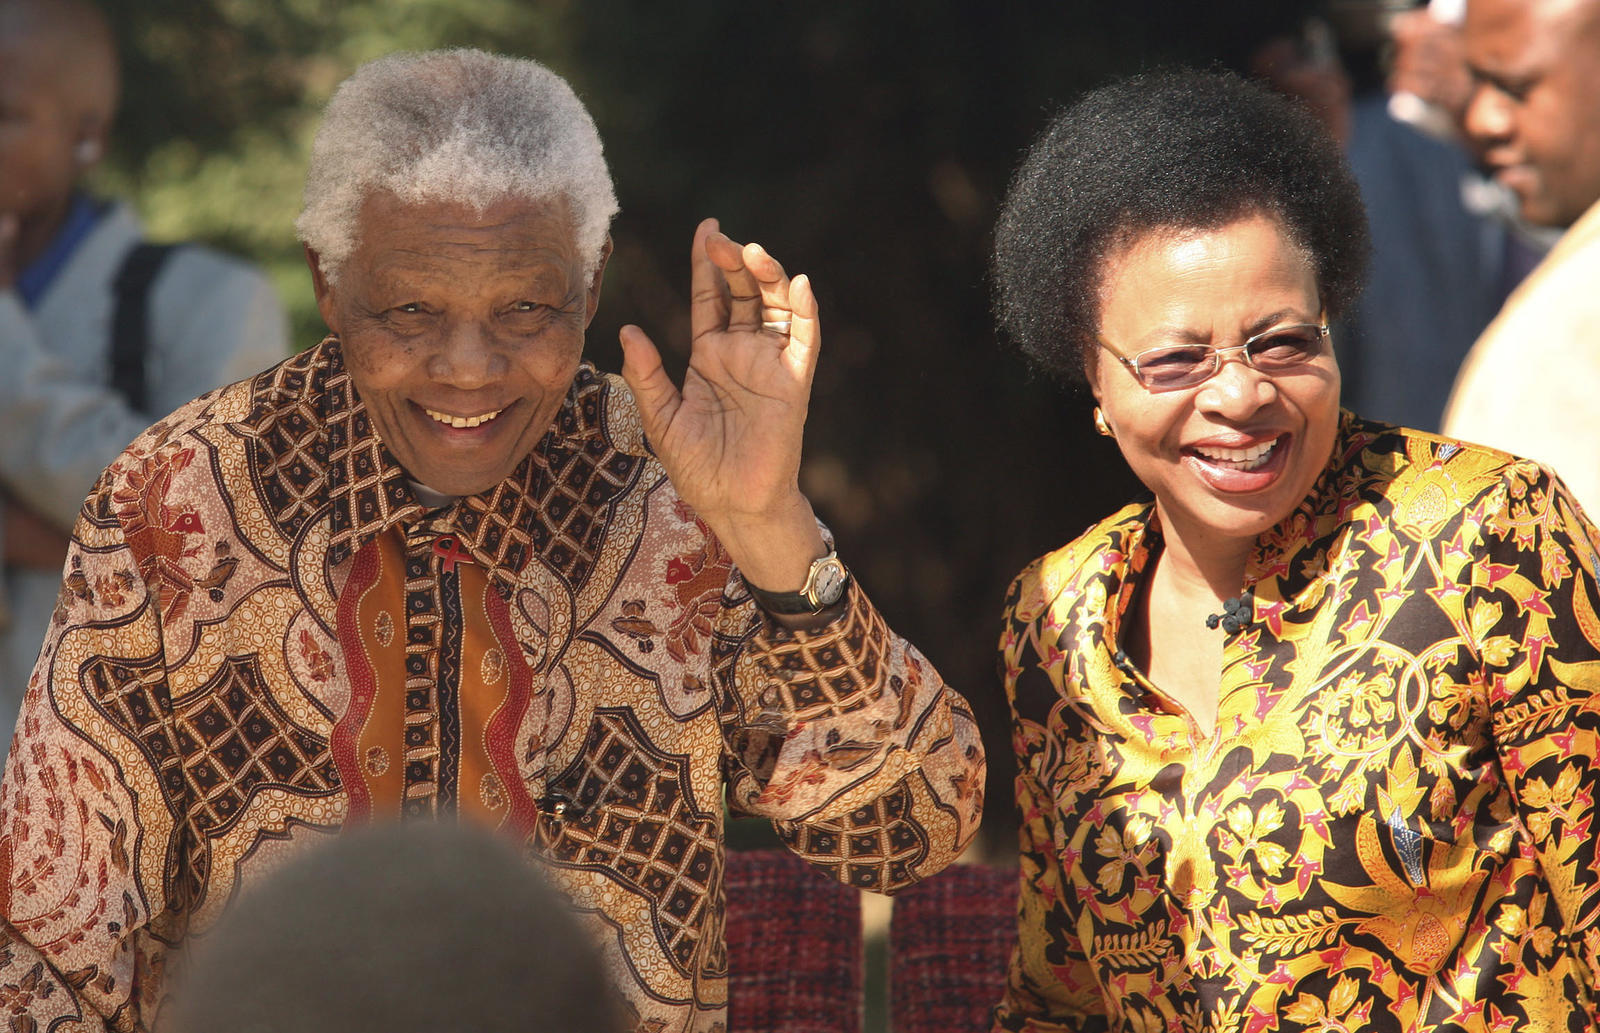 Former president of South Africa,Nelson Mandela smiles as he arrives with his wife Graca Machel for his 89th birthday celebrations which he decided to celebrate with children in Johannesburg